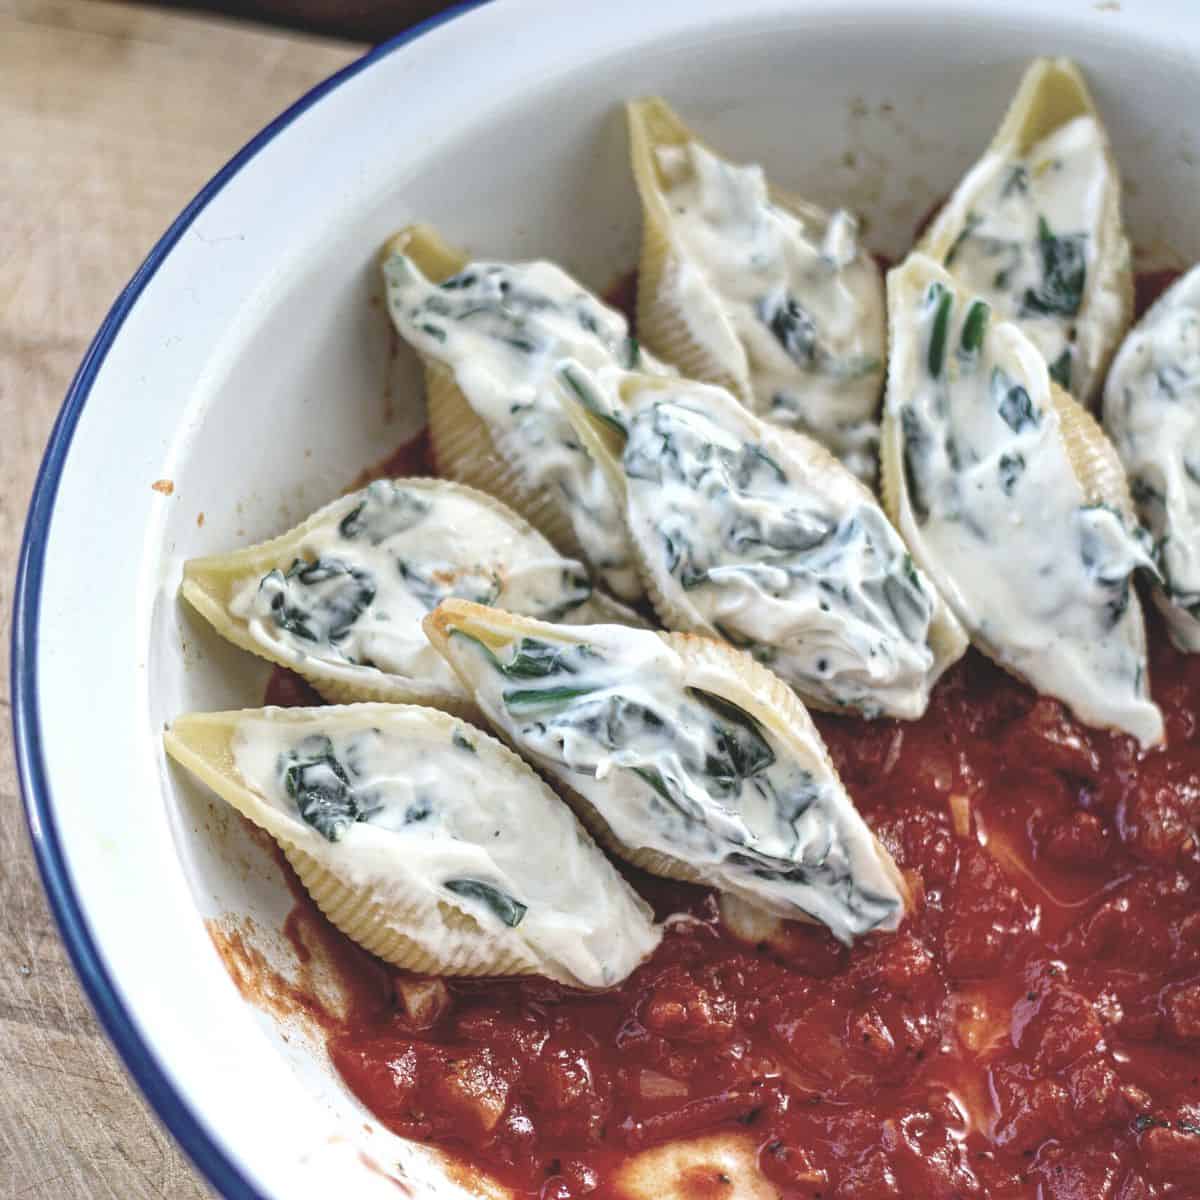 Vegan Stuffed Pasta Shells with Spinach, Cream Cheese and Tomato Sauce